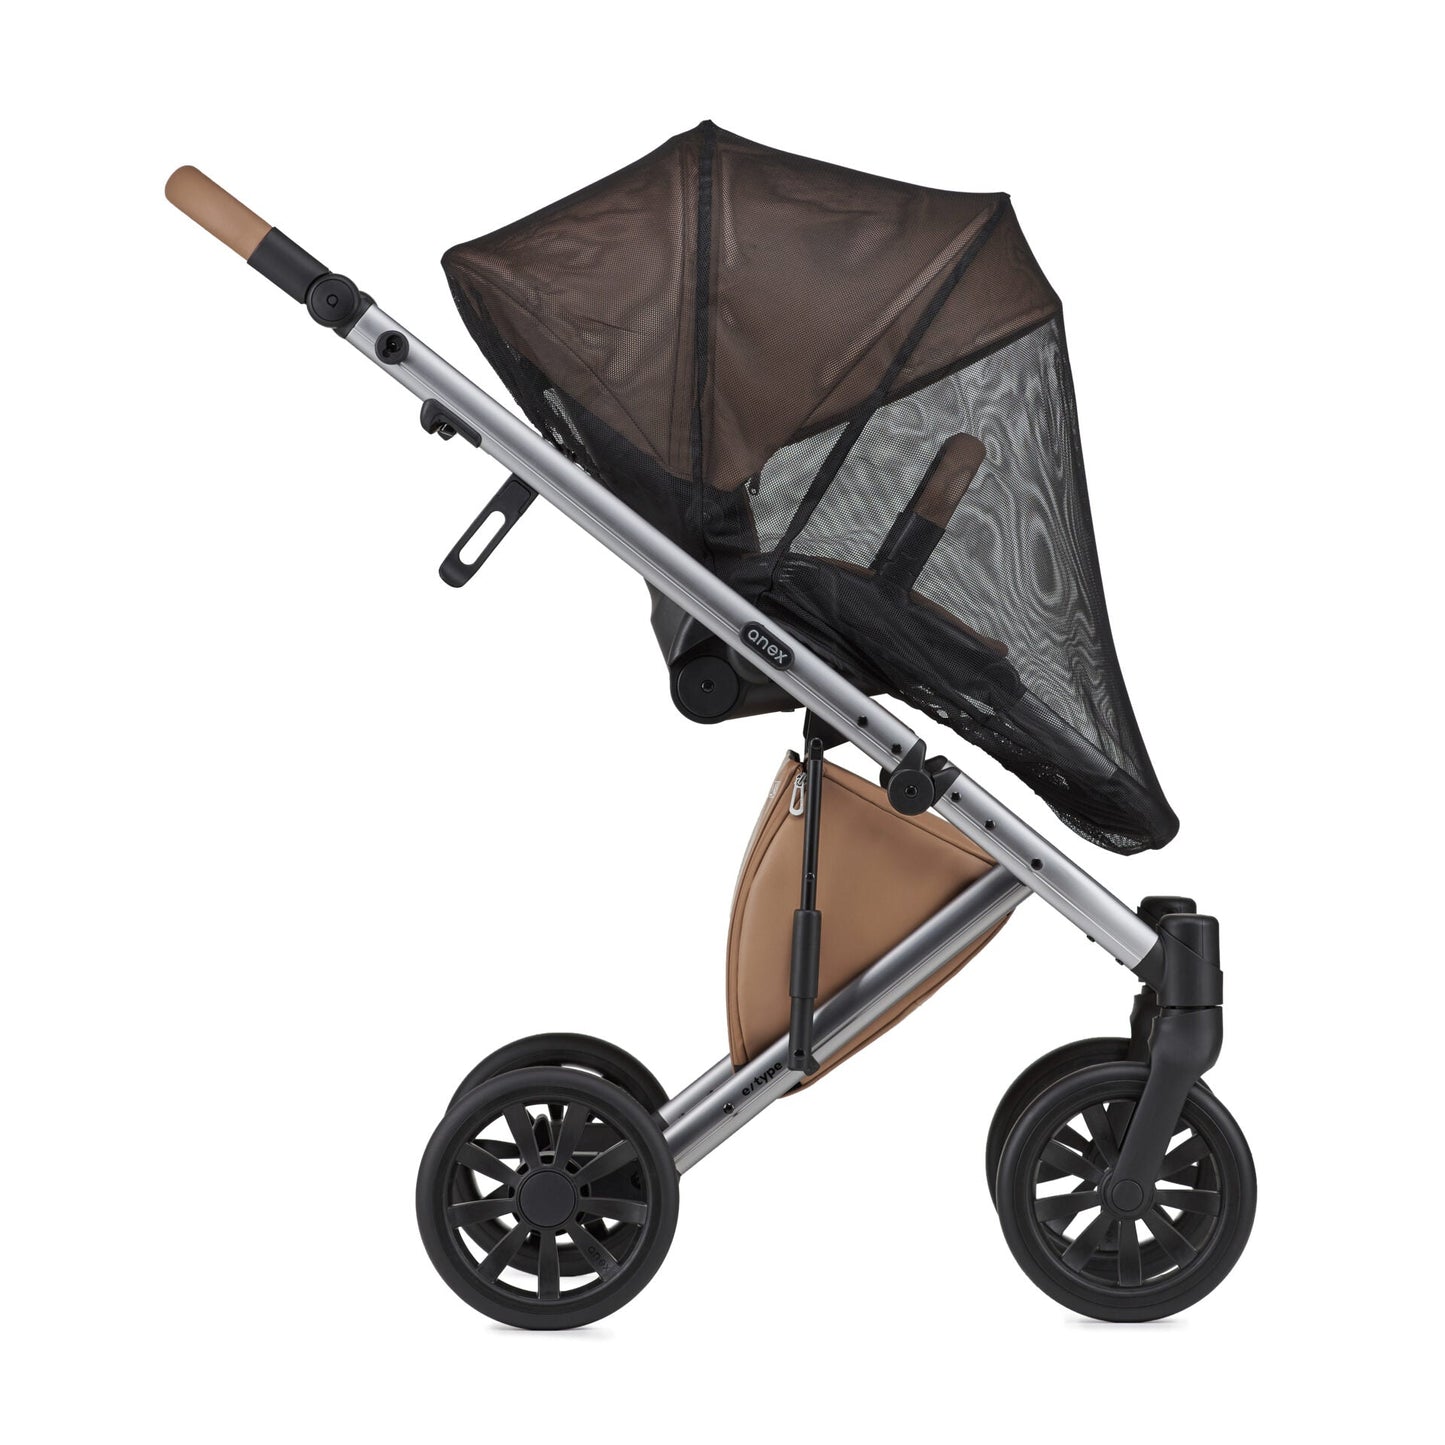 Anex Baby E Type Travel System With Cybex Aton B Car Seat and Base - Sepia